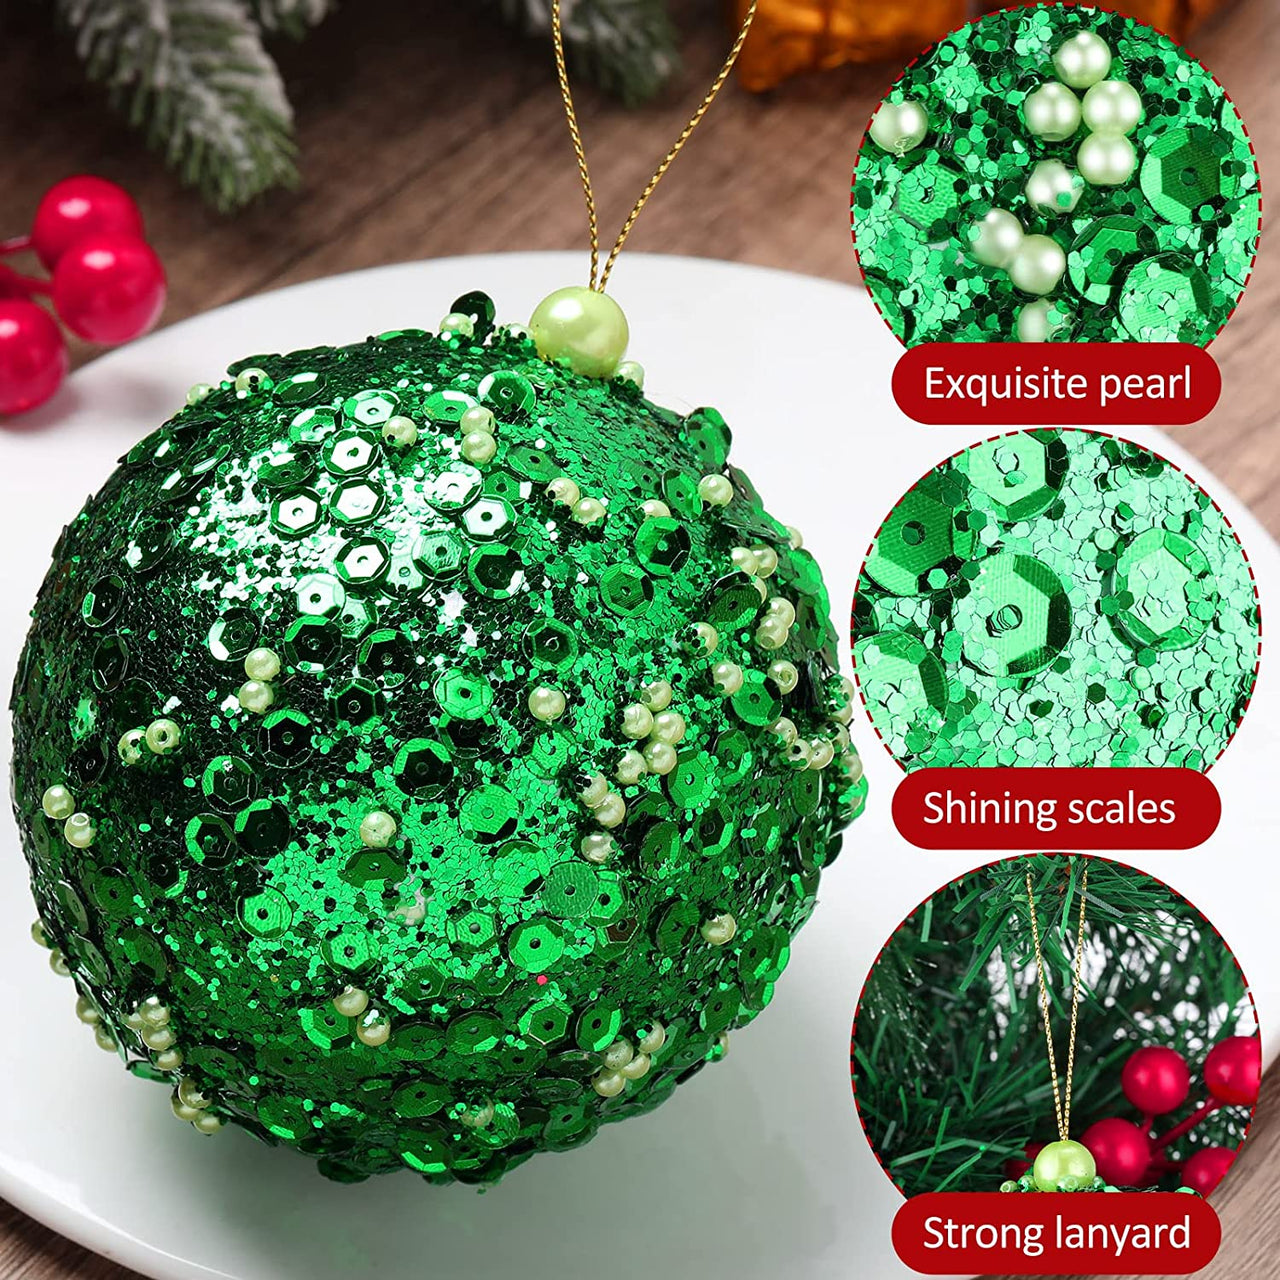 12 Pieces 4.25 Inch Christmas Ball Ornaments Christmas Tree Hanging Balls Glitter Sequin Xmas Tree Baubles Set for Holiday Party Decorations